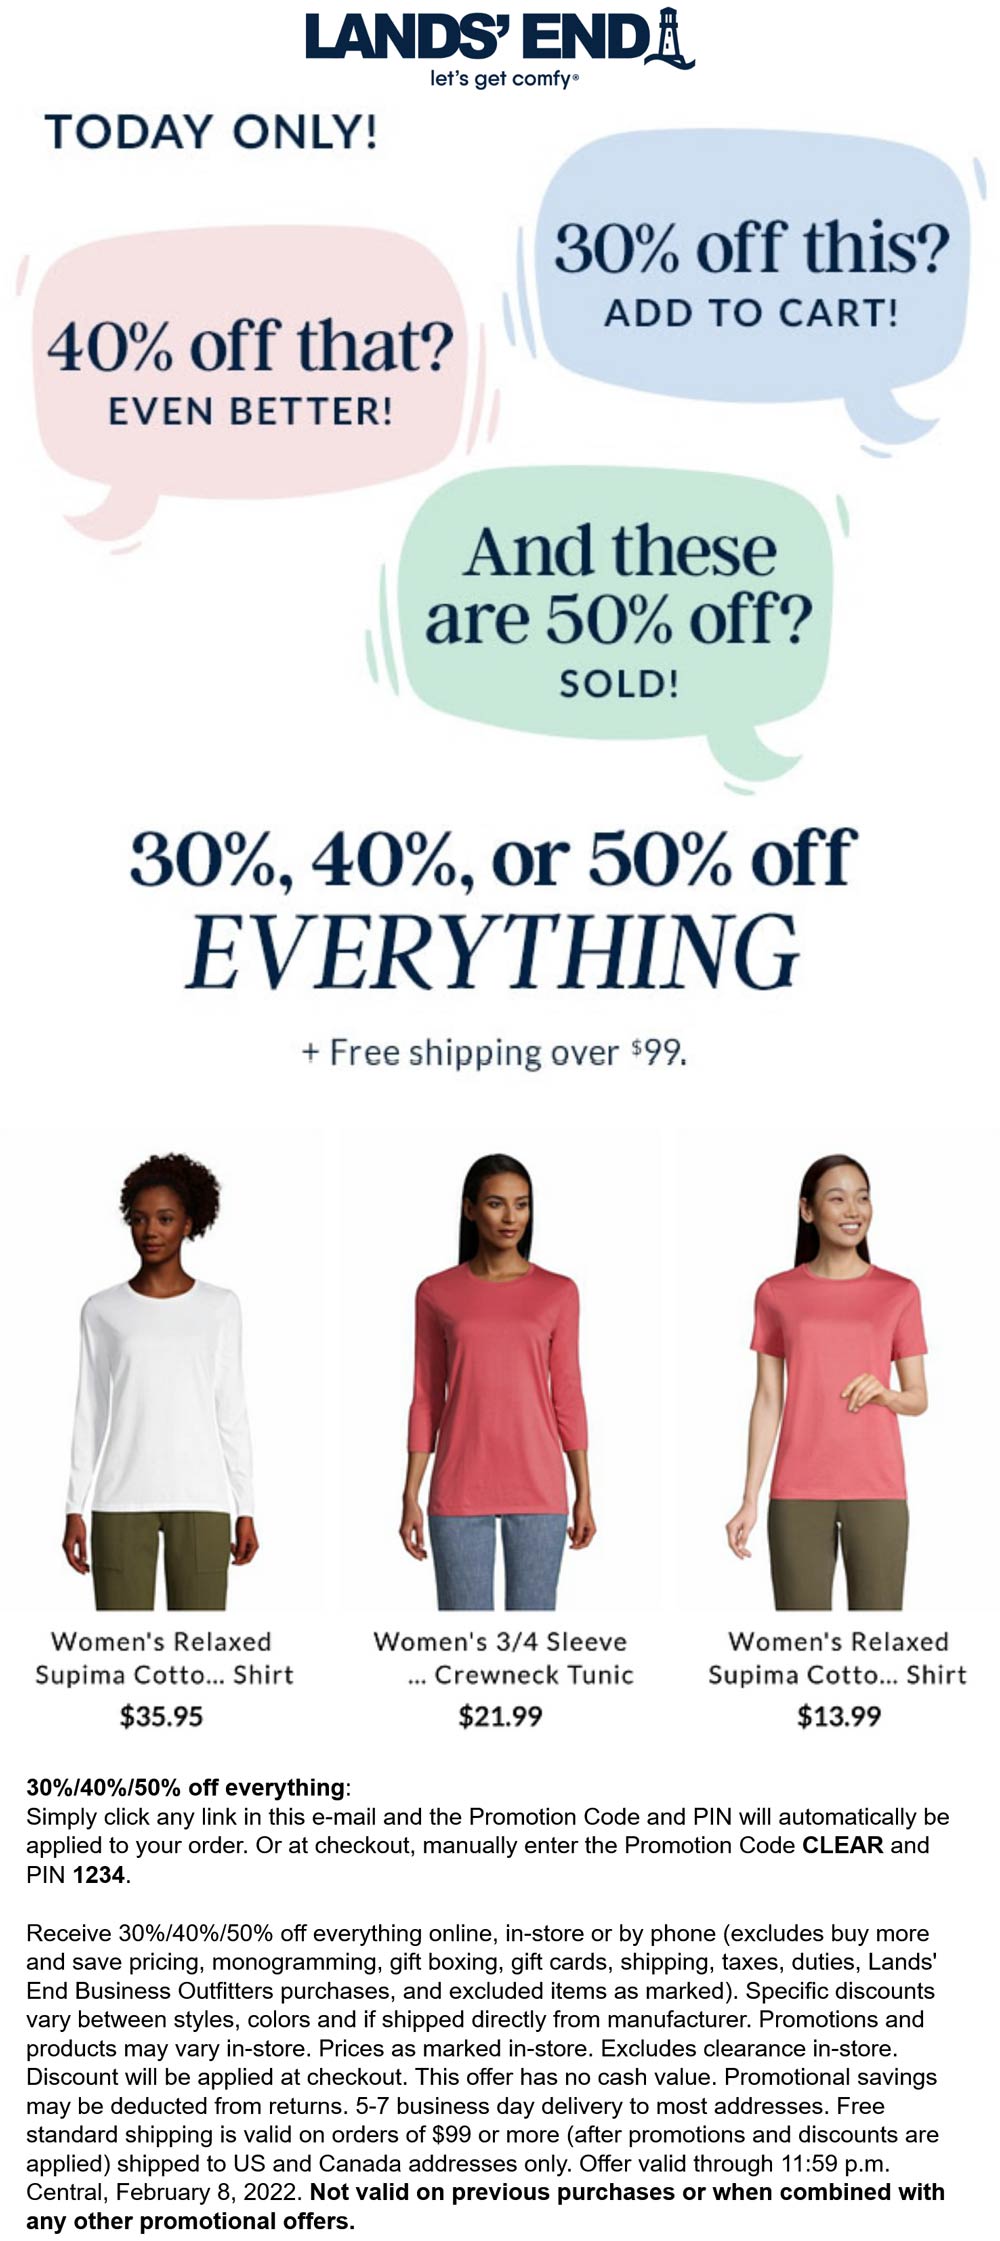 Lands End stores Coupon  30-50% off today at Lands End, or online via promo code CLEAR and pin 1234 #landsend 